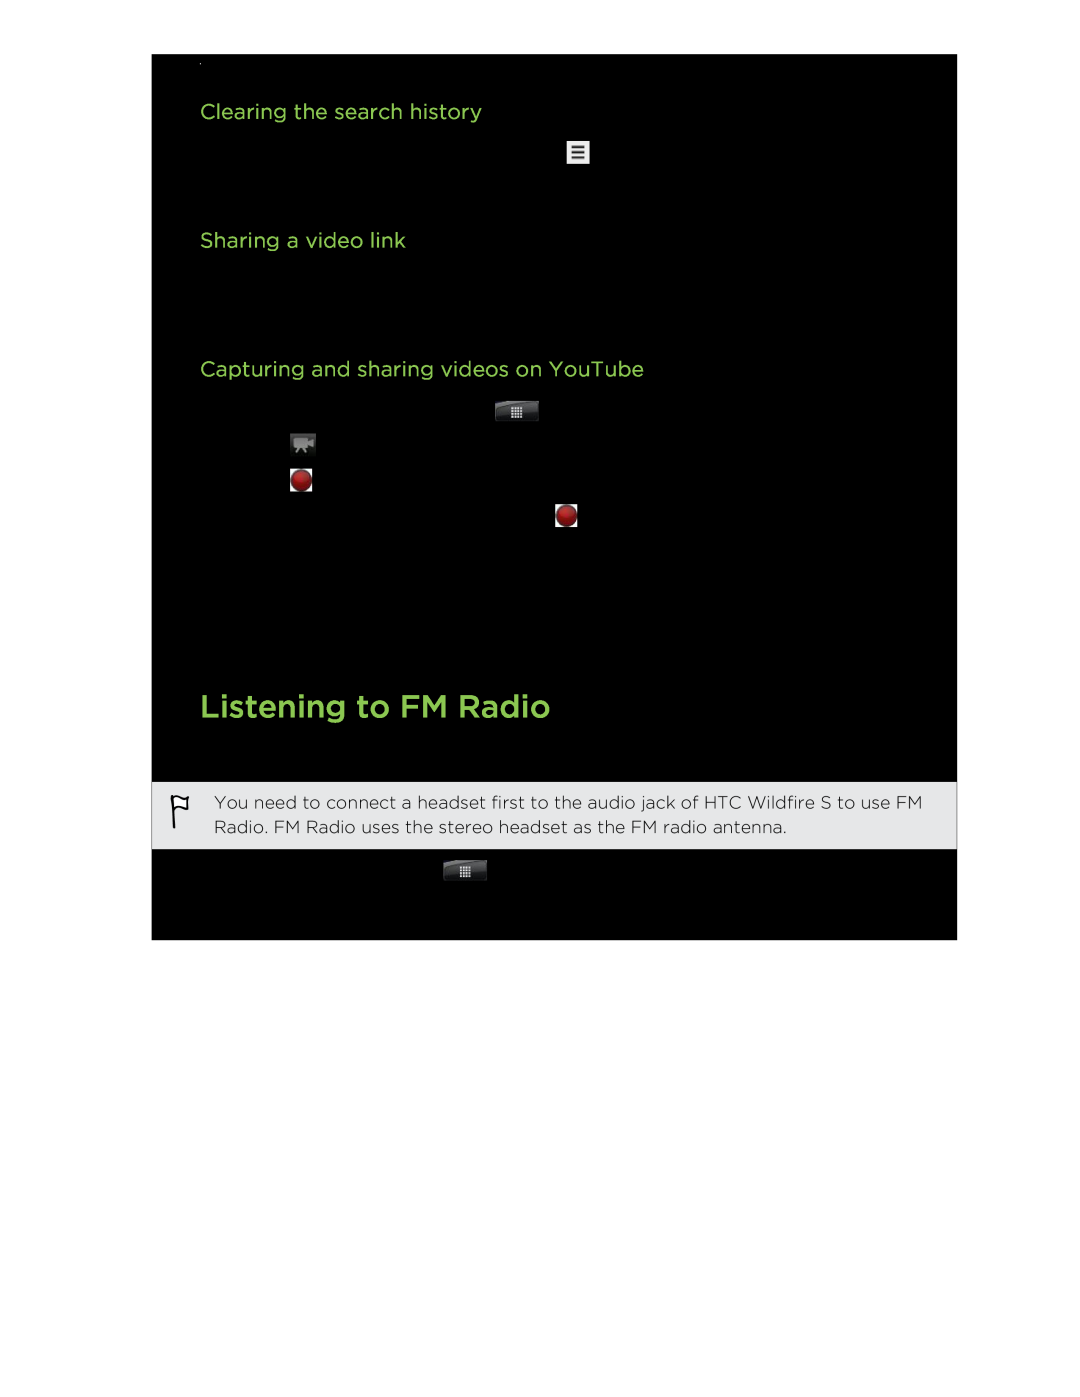 HTC Listening to FM Radio, Clearing the search history, Sharing a video link, Capturing and sharing videos on YouTube 